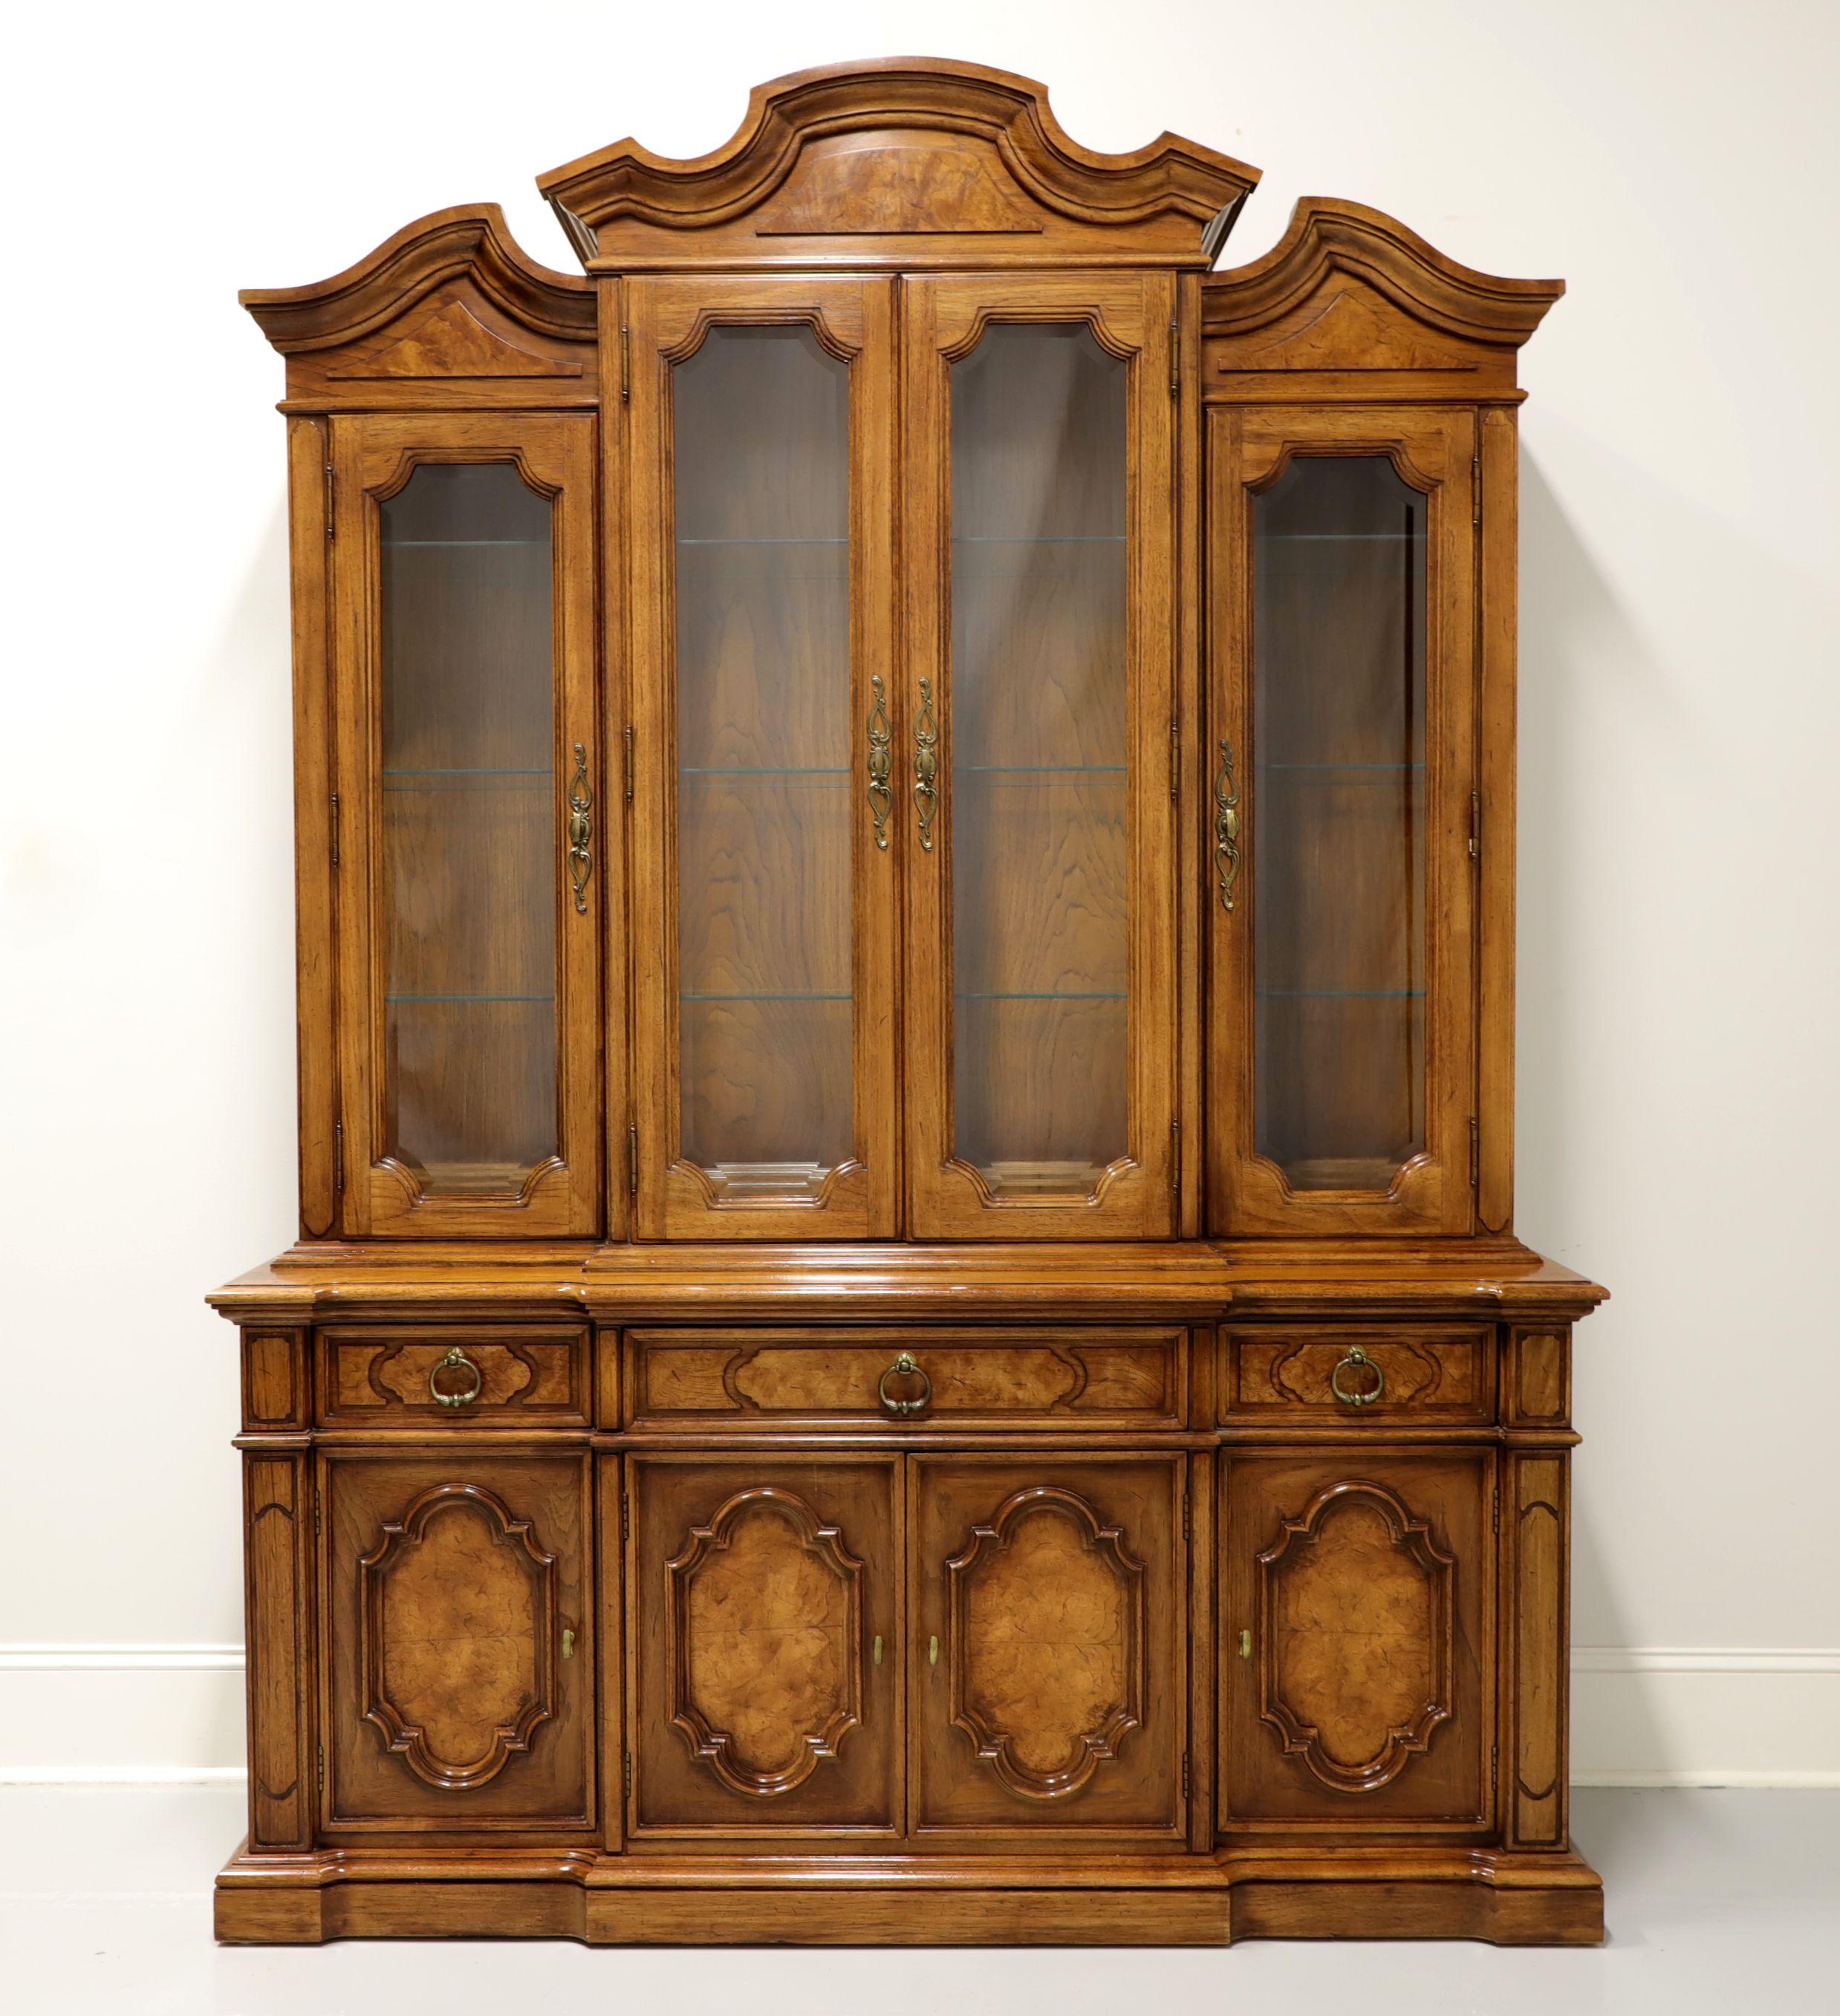 A Mediterranean style china cabinet by Thomasville, from their Ceremony Collection. Walnut with brass hardware, distinctive arched top with crown moulding and burl walnut inlays to top, drawer fronts & door fronts. Upper lighted cabinet has four